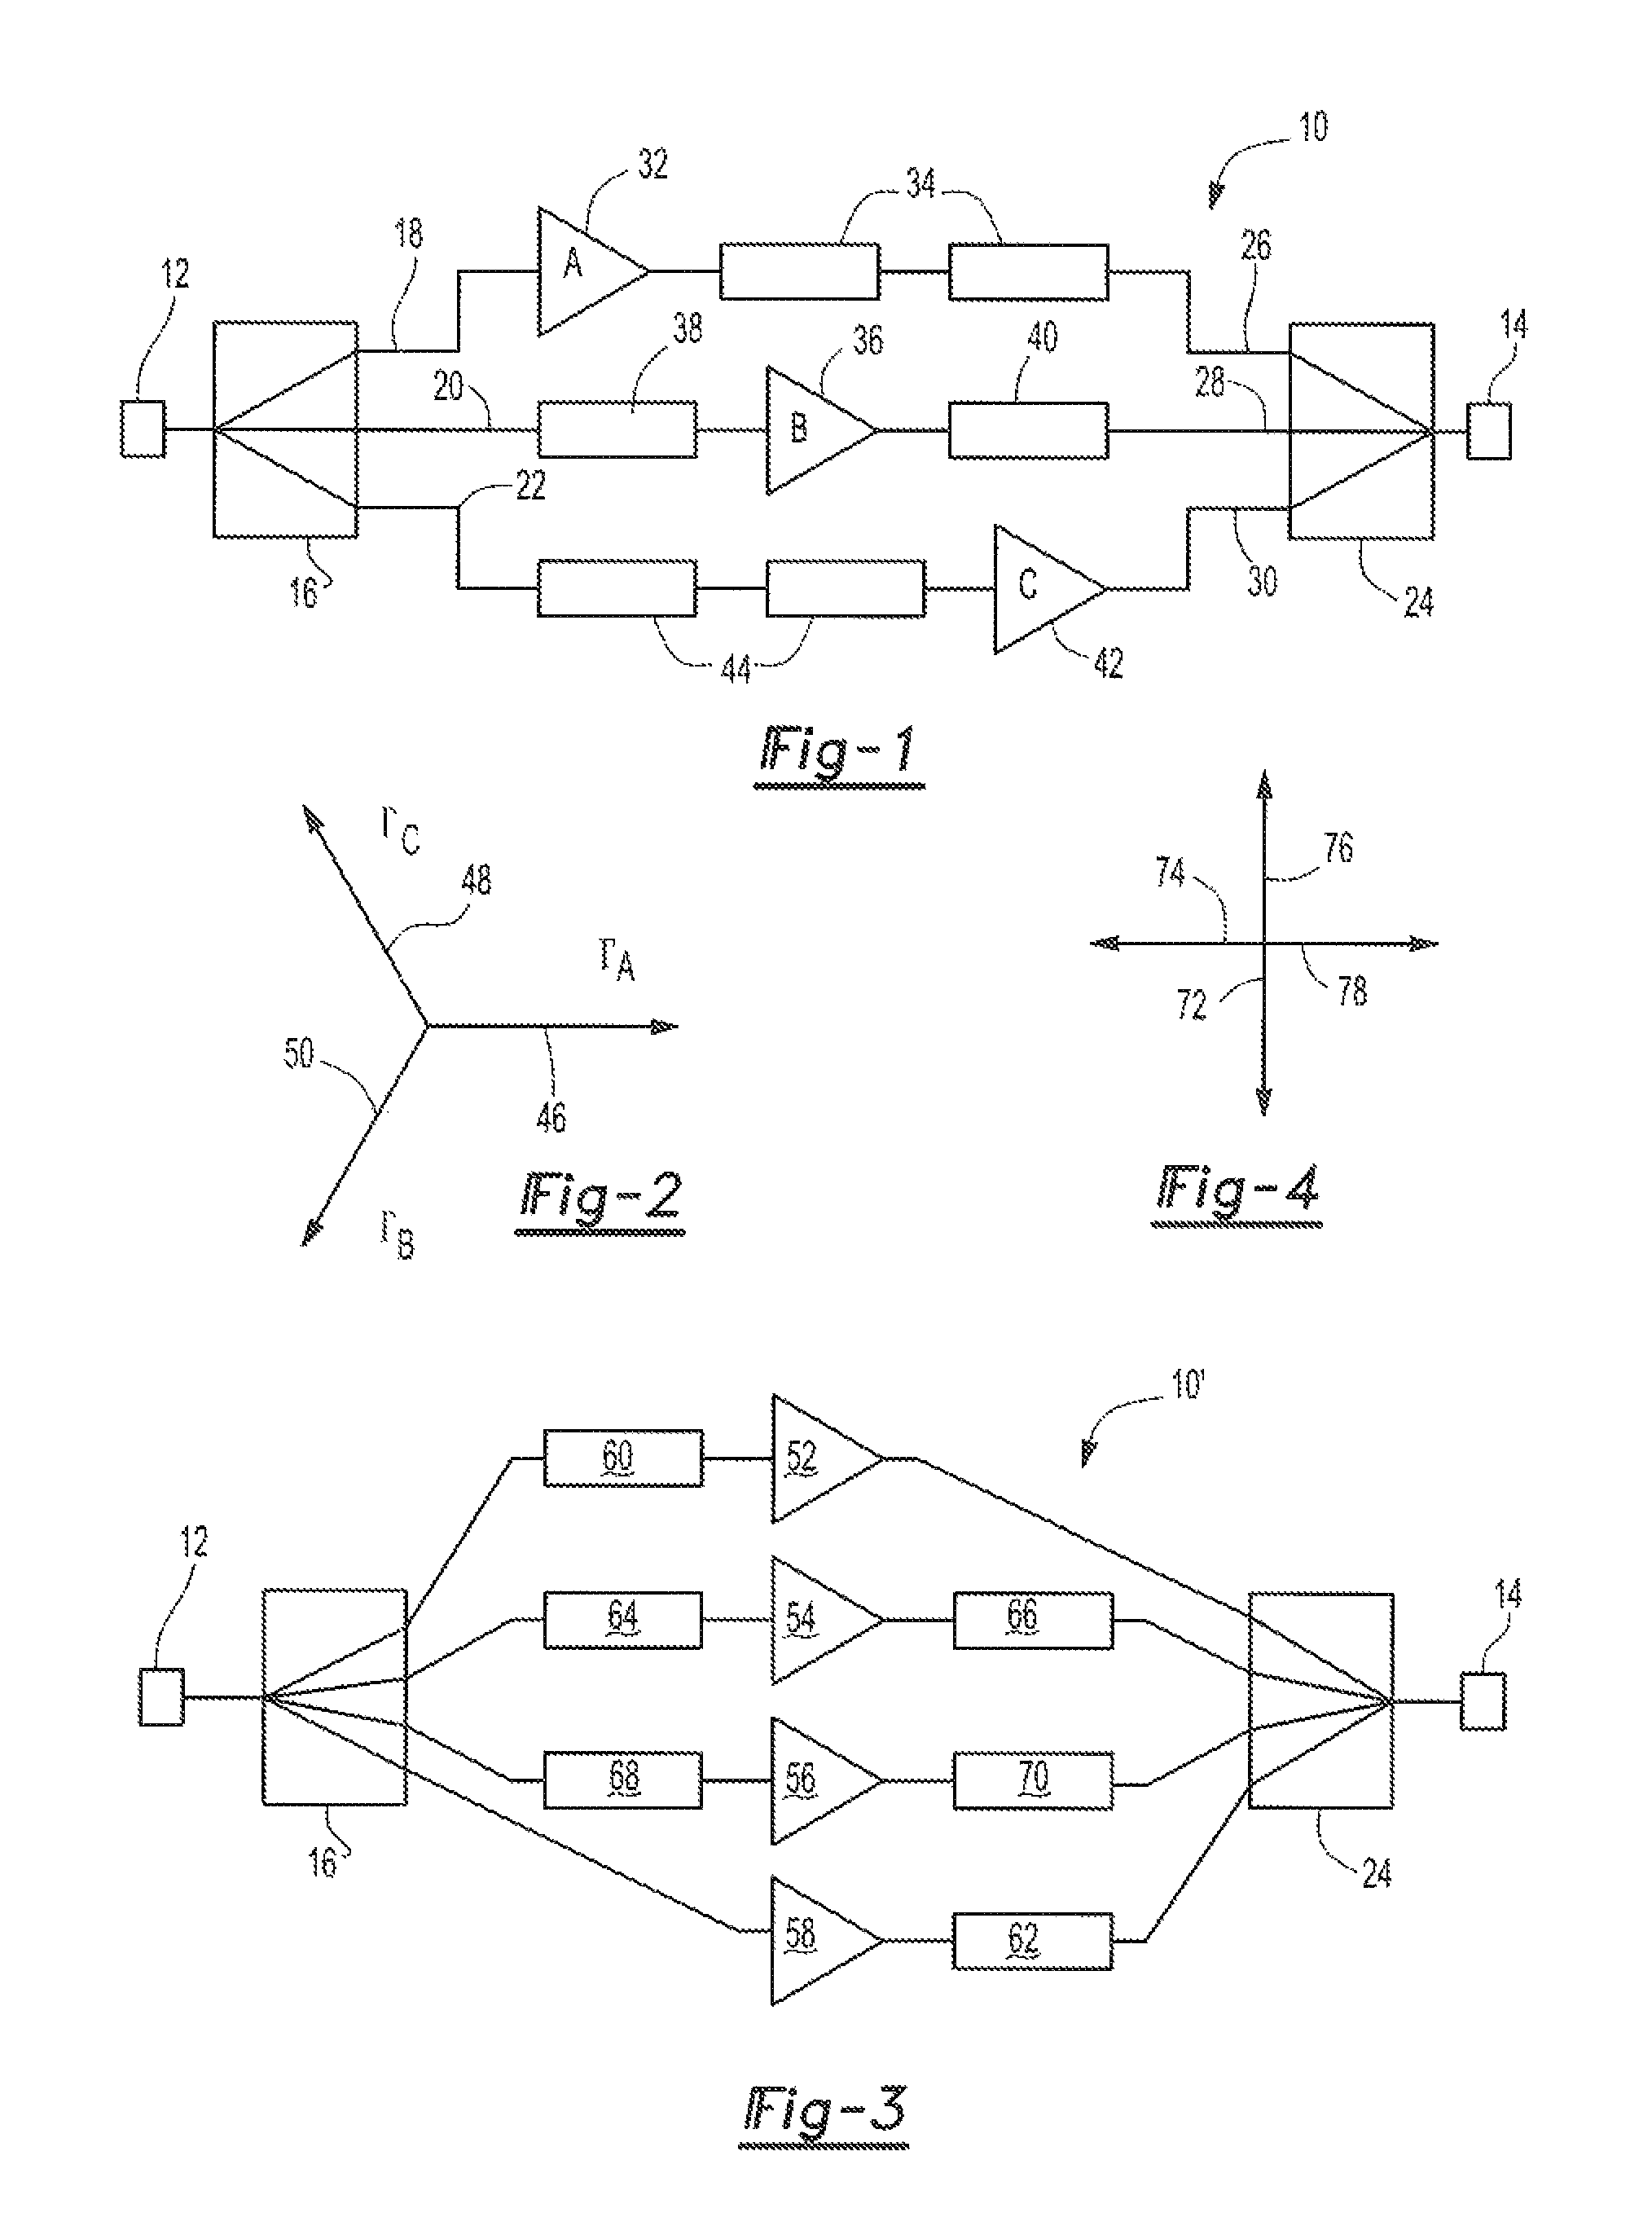 Power dividing and power combining circuits